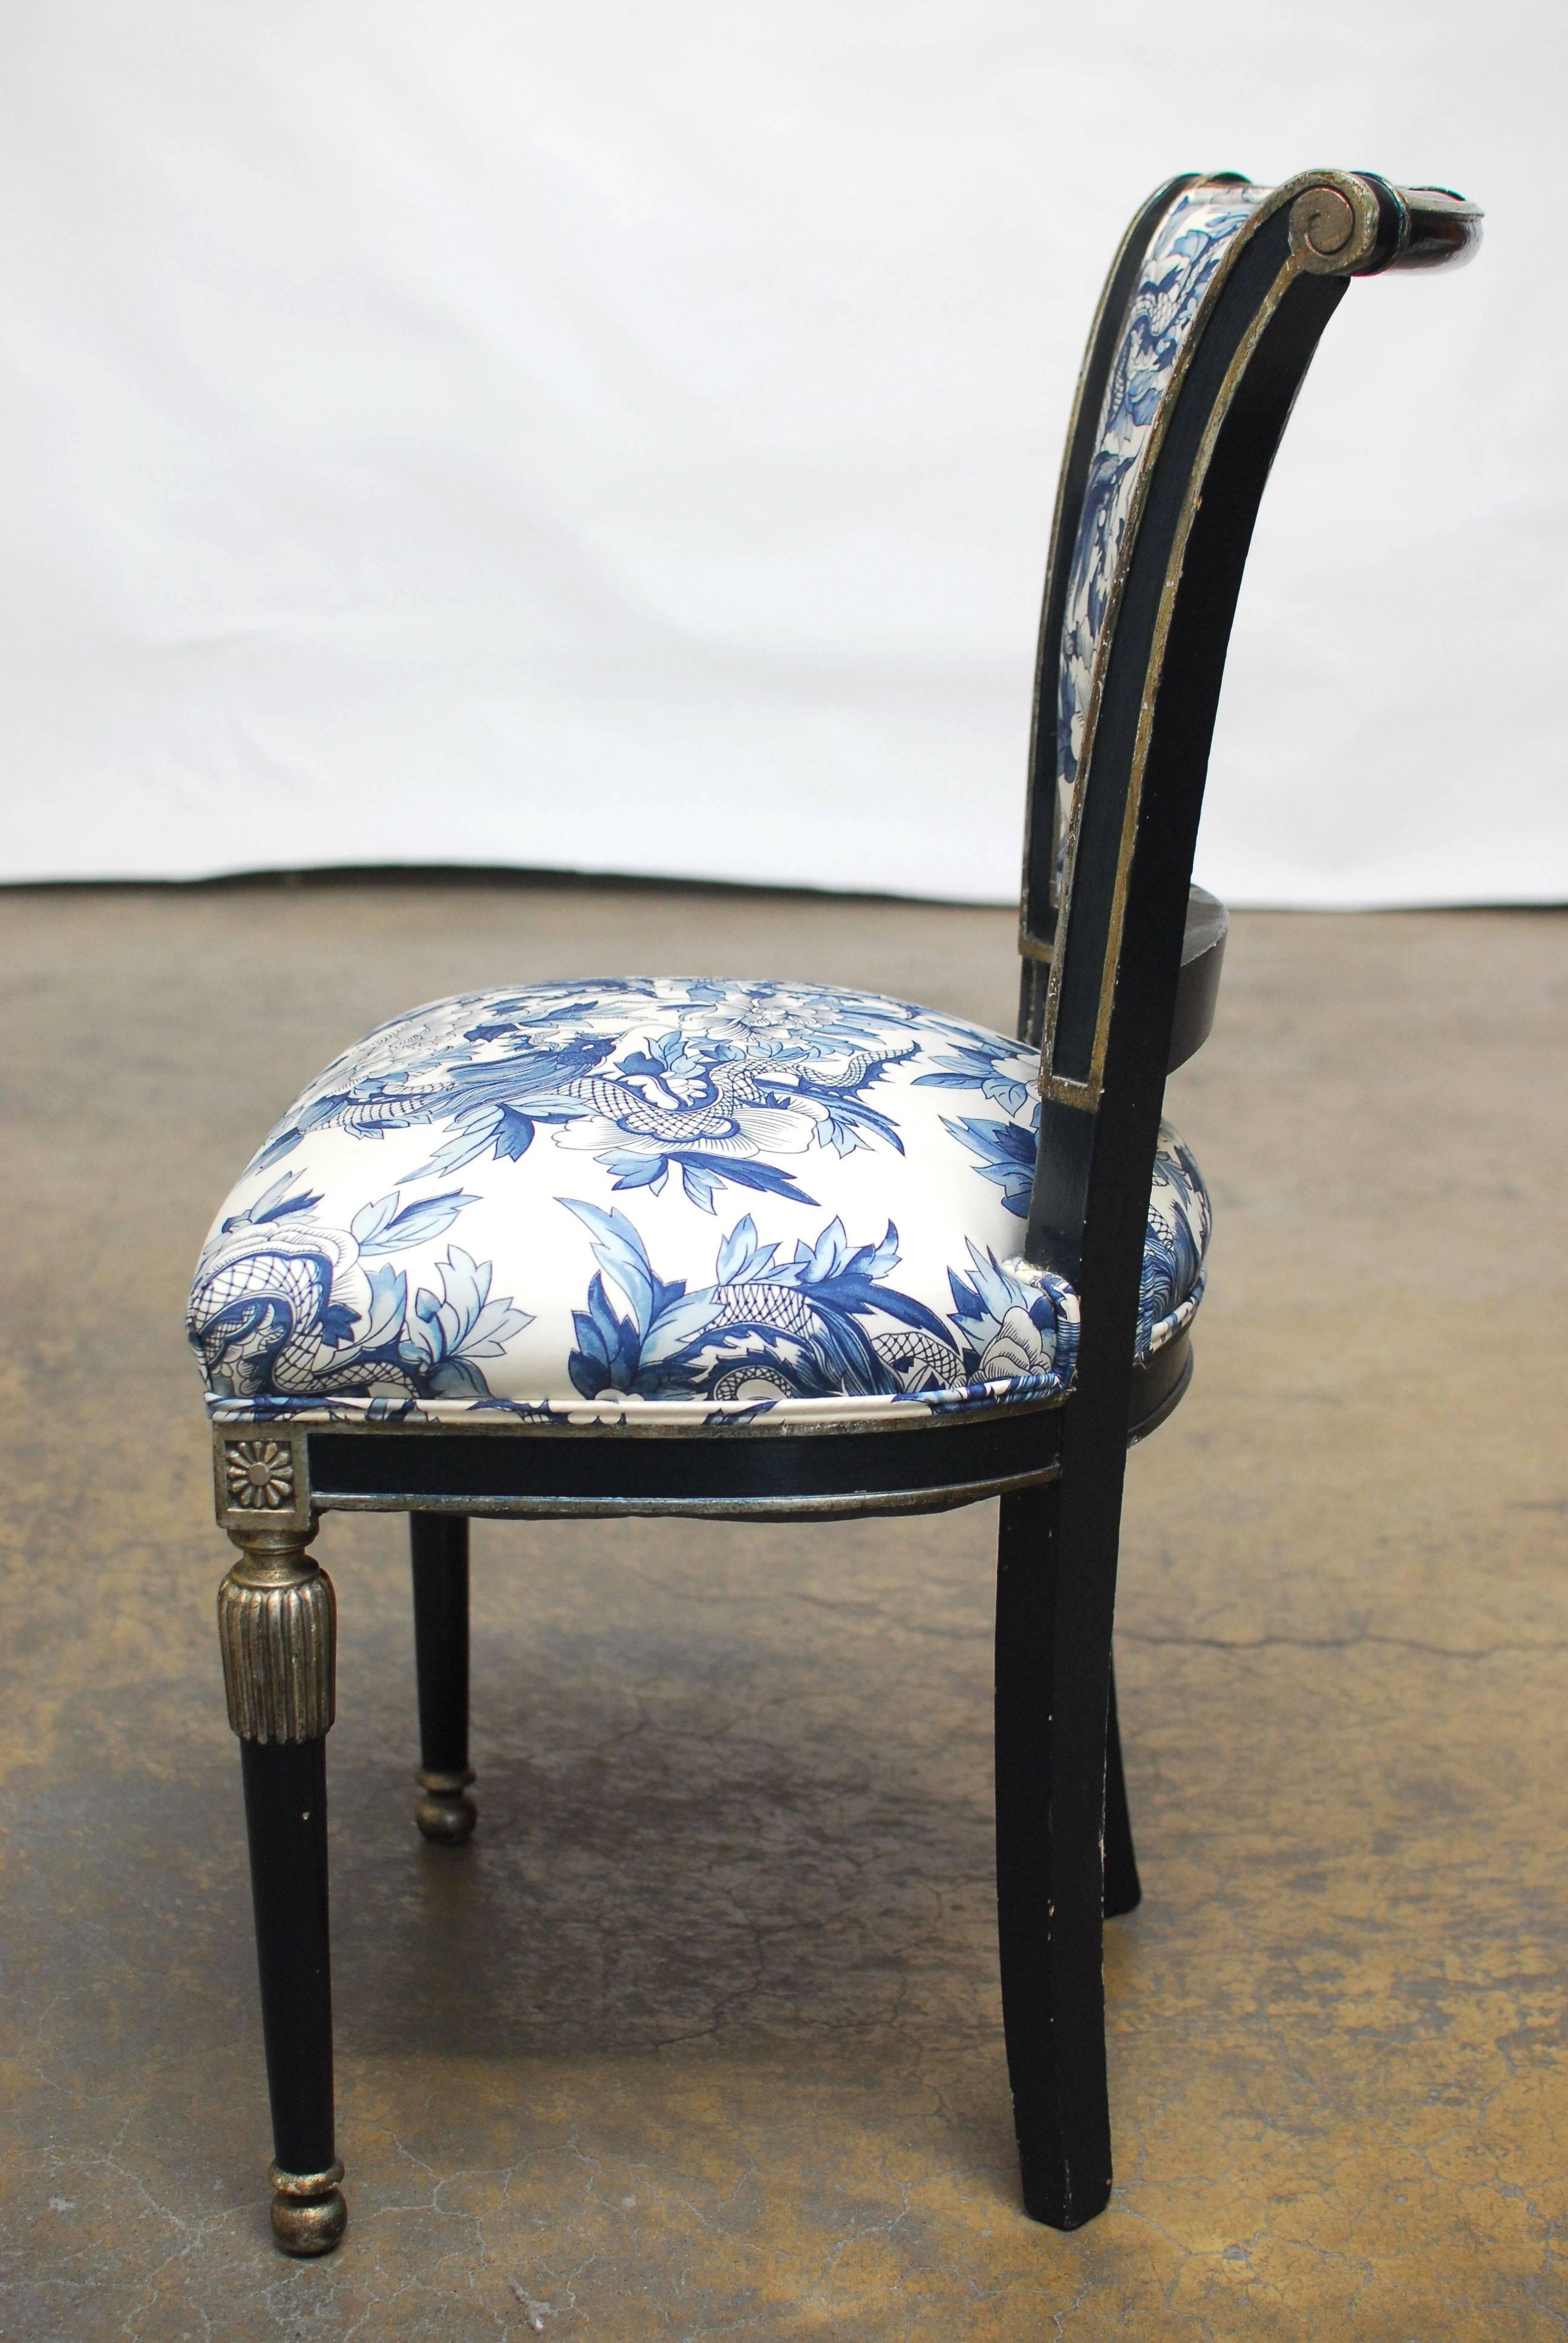 19th Century French Directoire Style Chairs with Chinoiserie Dragon Upholstery